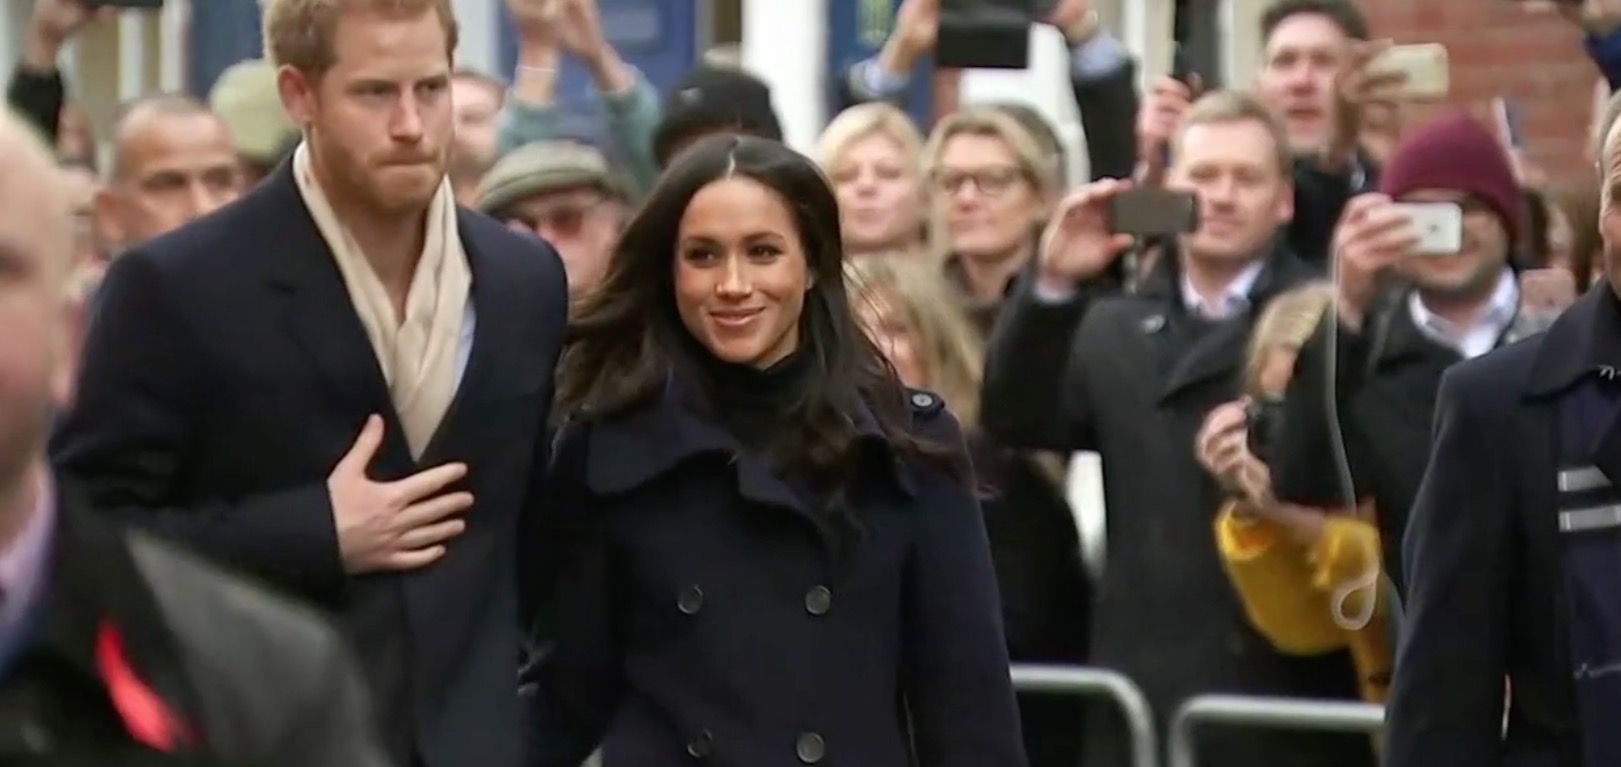 When Meghan pulled out the @strathberry bag, you 𝗸𝗻𝗼𝘄 the outfit was  gonna be 𝙜𝙤𝙤𝙙. And these slideshow is proof of exactly that. 💅🏽👜